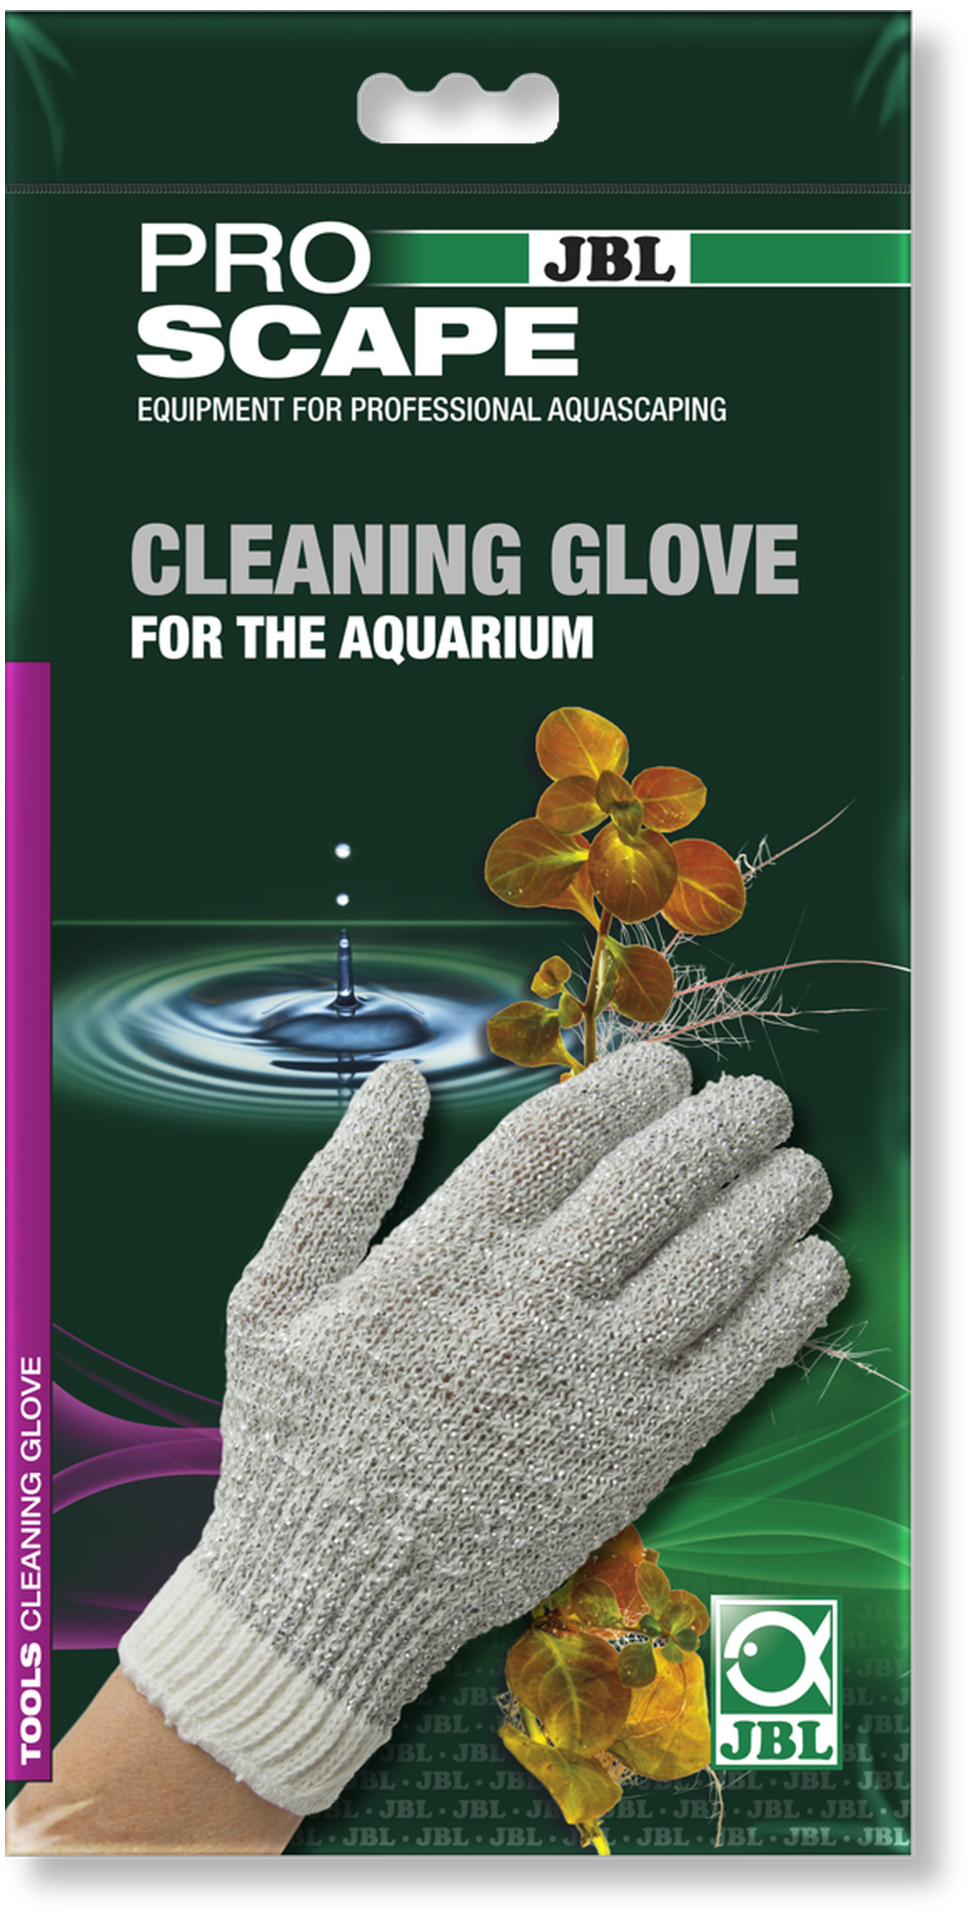 JBL Pro Scape Cleaning Glove